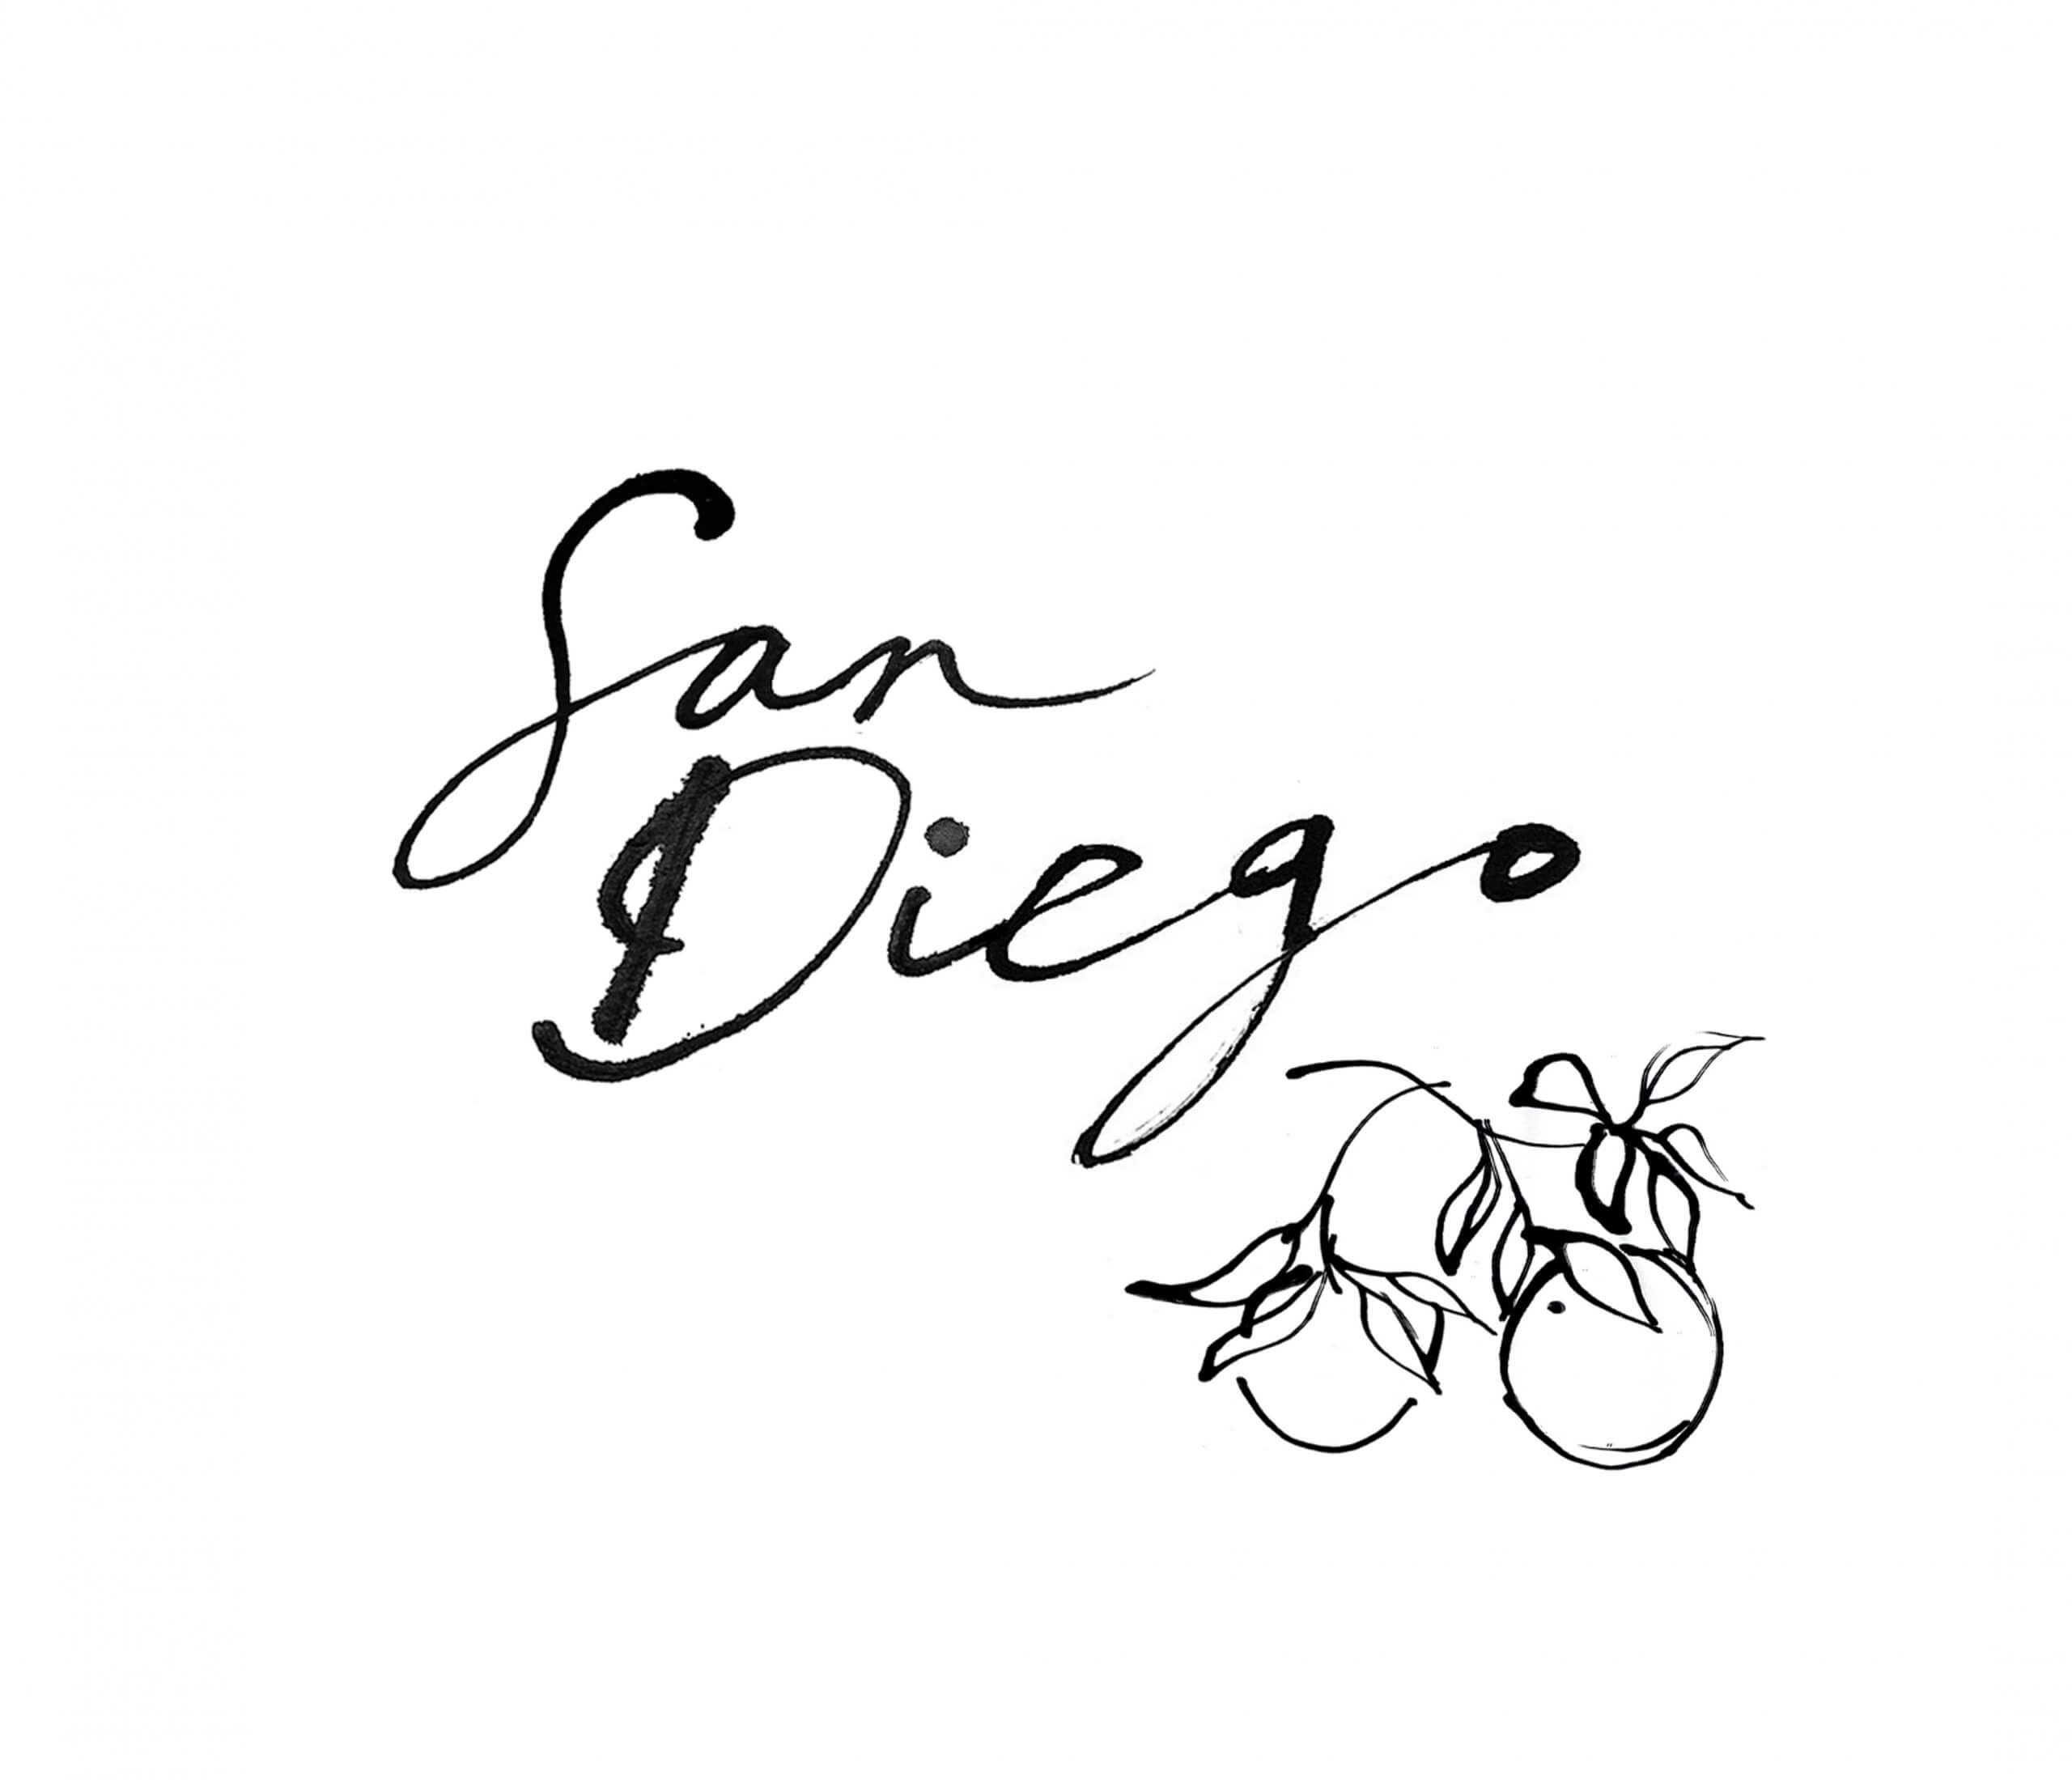 illustration and lettering San Diego  in California, park of hand drawn, simple inky line lettering and drawing. Taken from an illustrated map of the State of California.